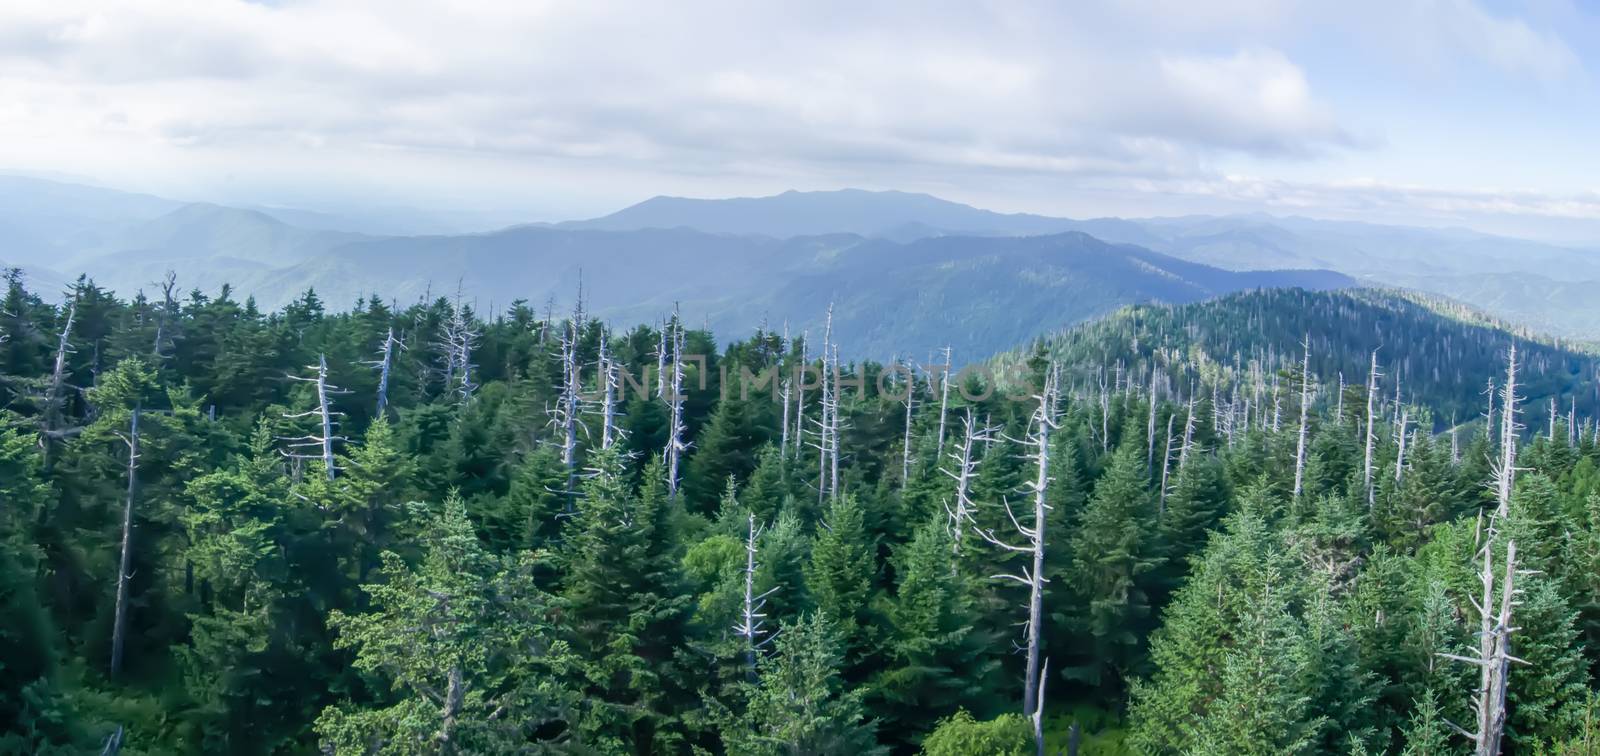 View from Clingman's Dome in the Great Smoky Mountains National  by digidreamgrafix